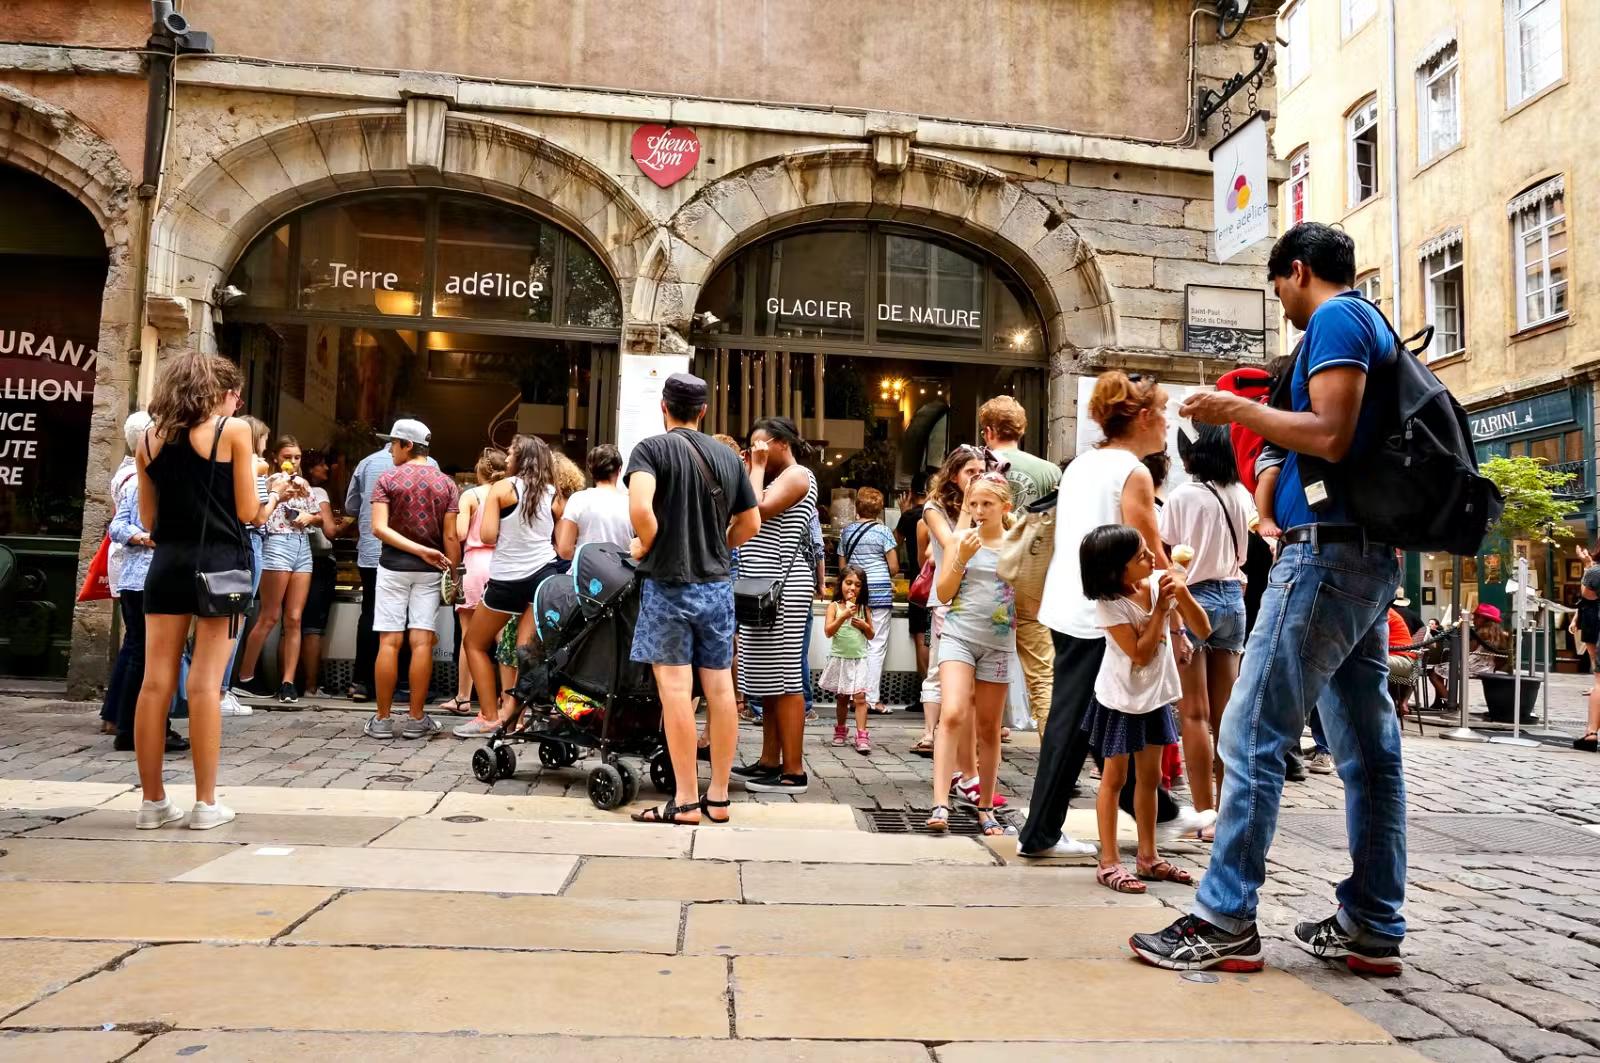 Queues snake out of the door at Terre Adélice. Image © Monica Suma / Lonely Planet